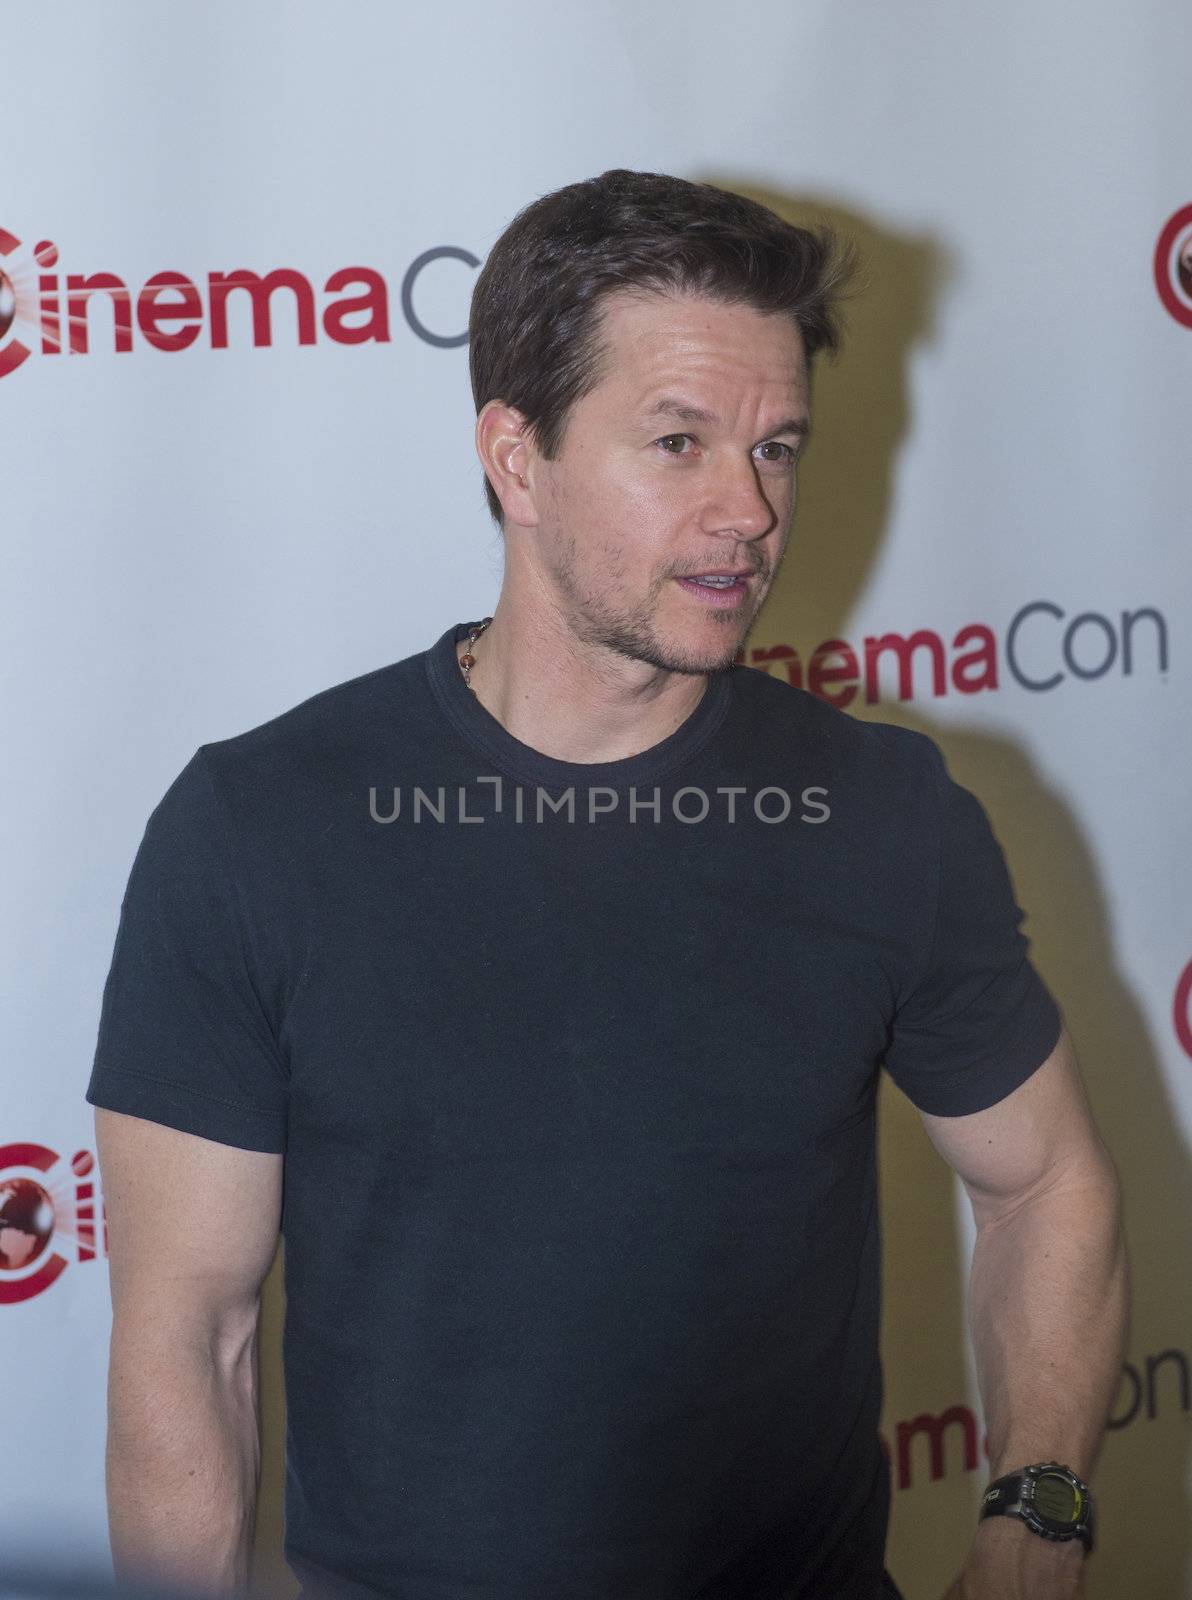 LAS VEGAS, NV - MARCH 24: Actor Mark Wahlberg arrives at the 2014 CinemaCon Paramount opening night presentation at Caesars Palace on March 24, 2014 in Las Vegas, Nevada